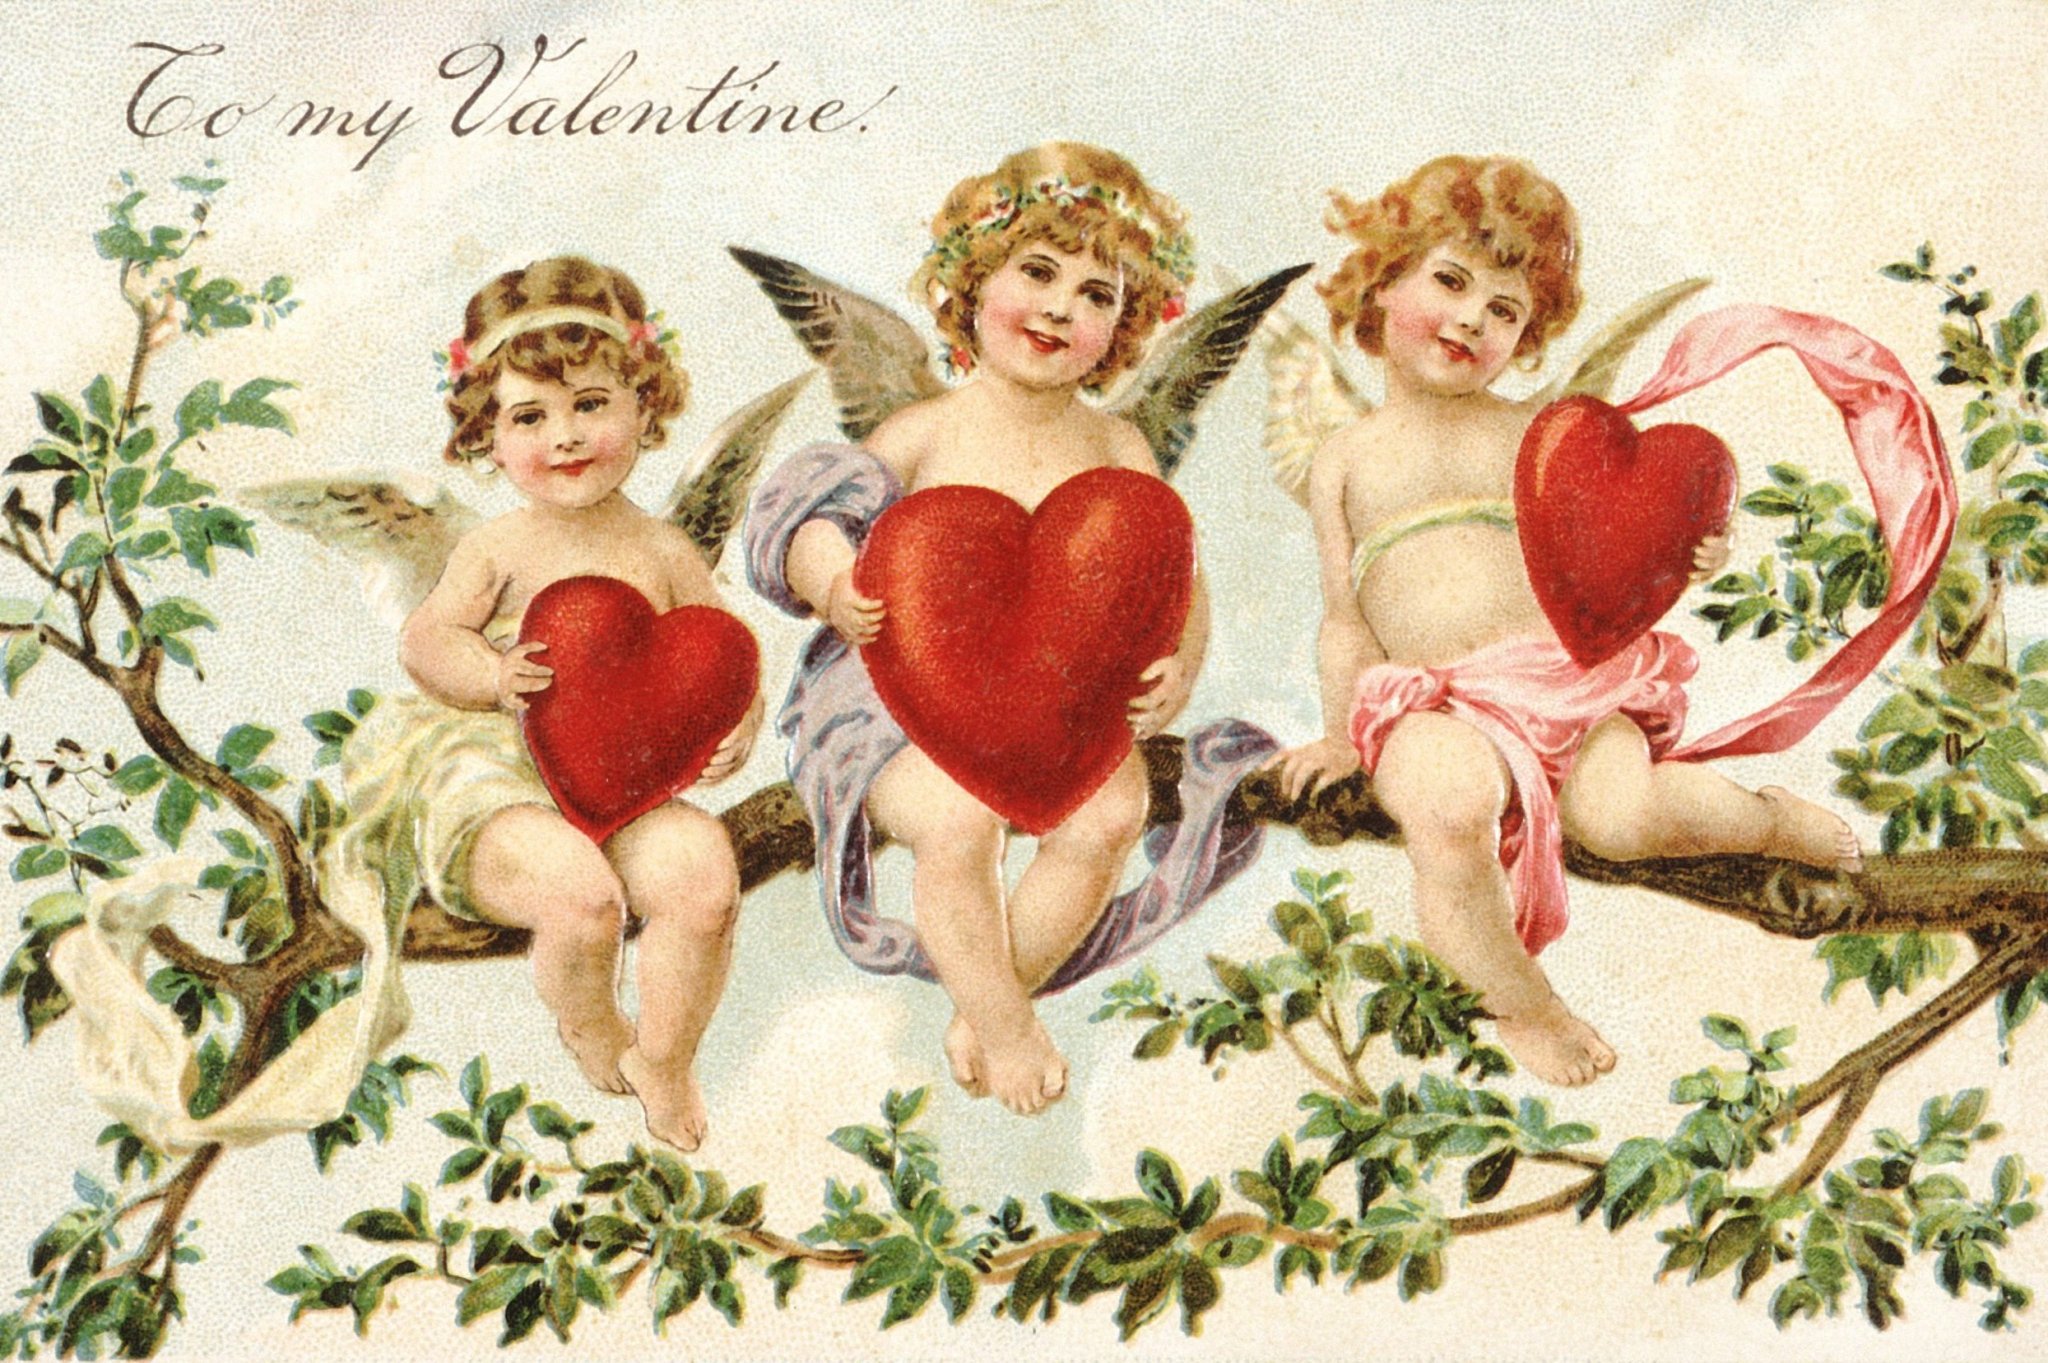 What Is Valentine's Day, and Why Do We Celebrate It?